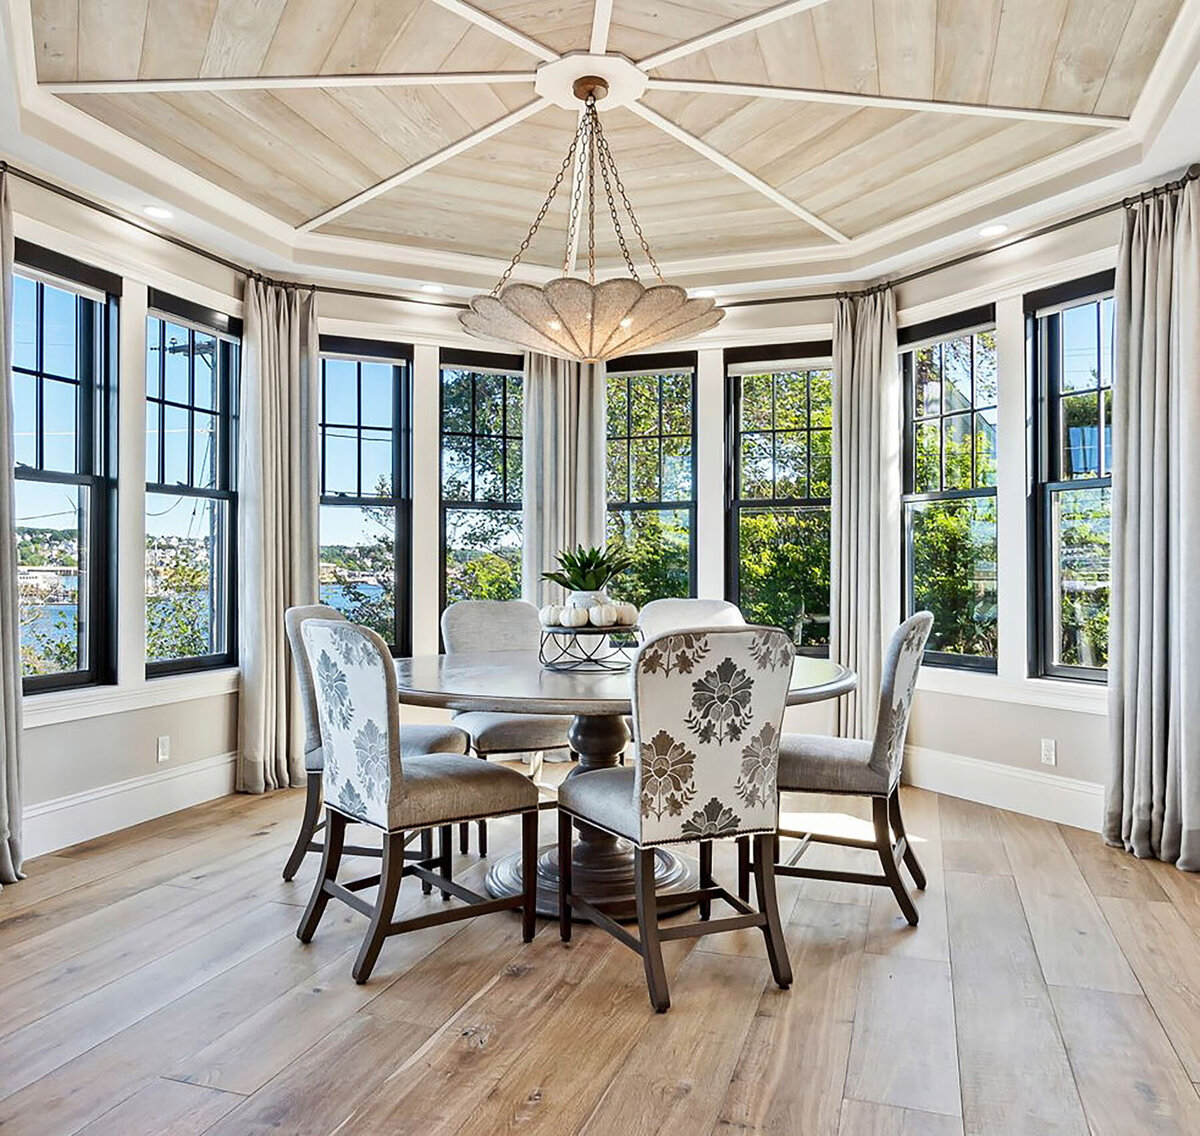 003-wood-panel-ceiling-round-dining